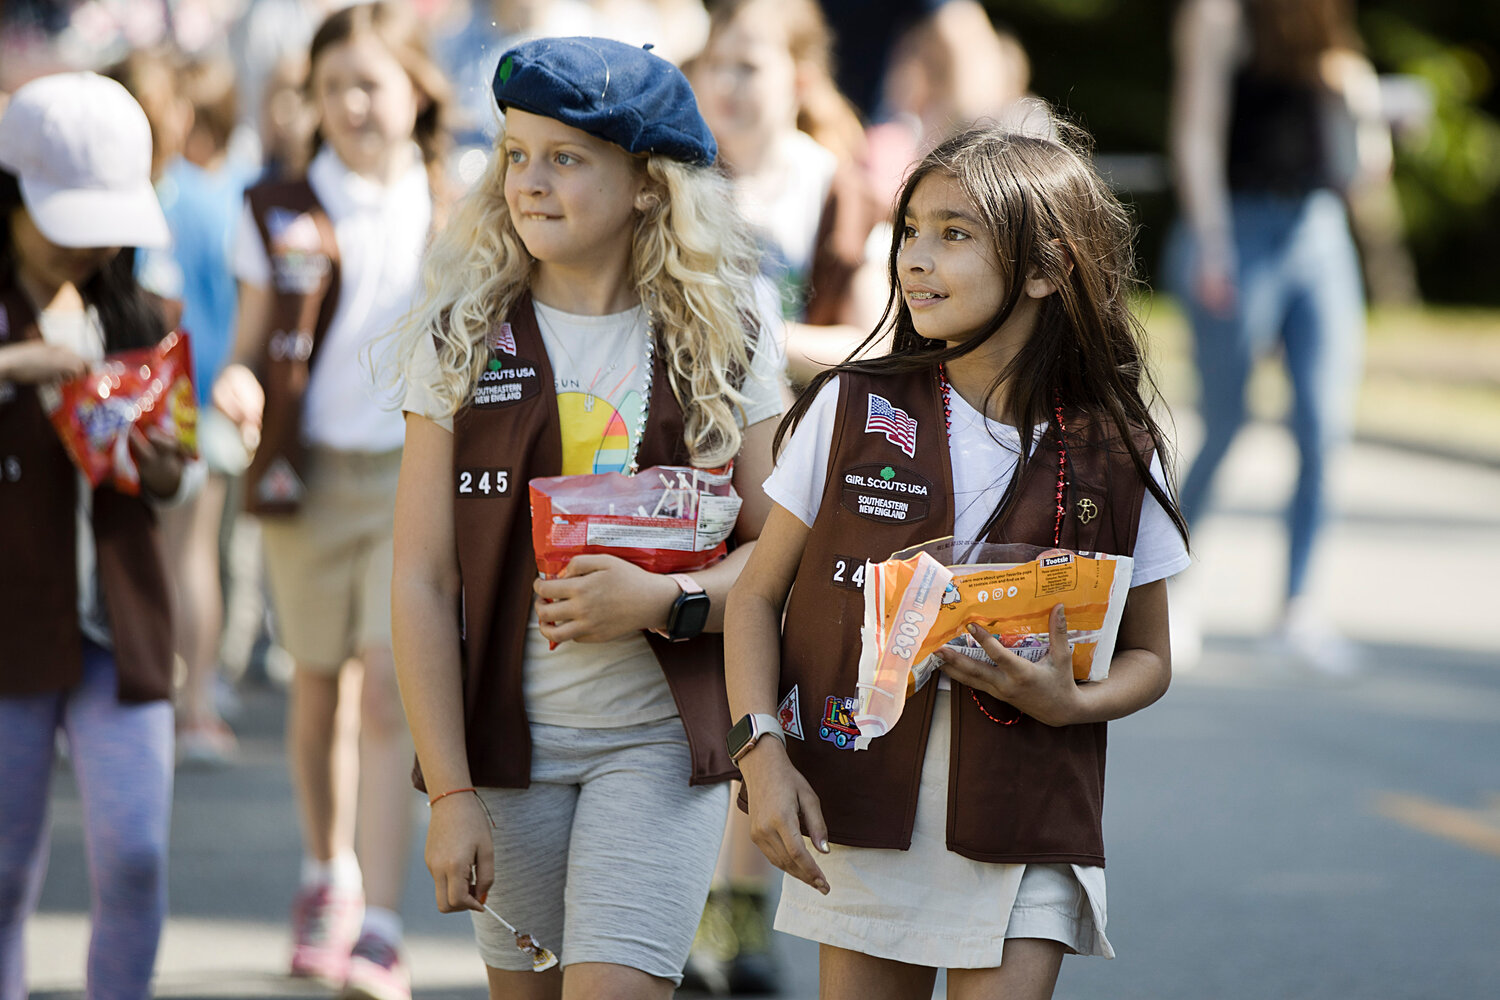 Jane Moores (left) and Sofia Riazi of Brownie Troop 245, throw candy to spectators while participating in Barrington's Memorial Day parade, Monday.